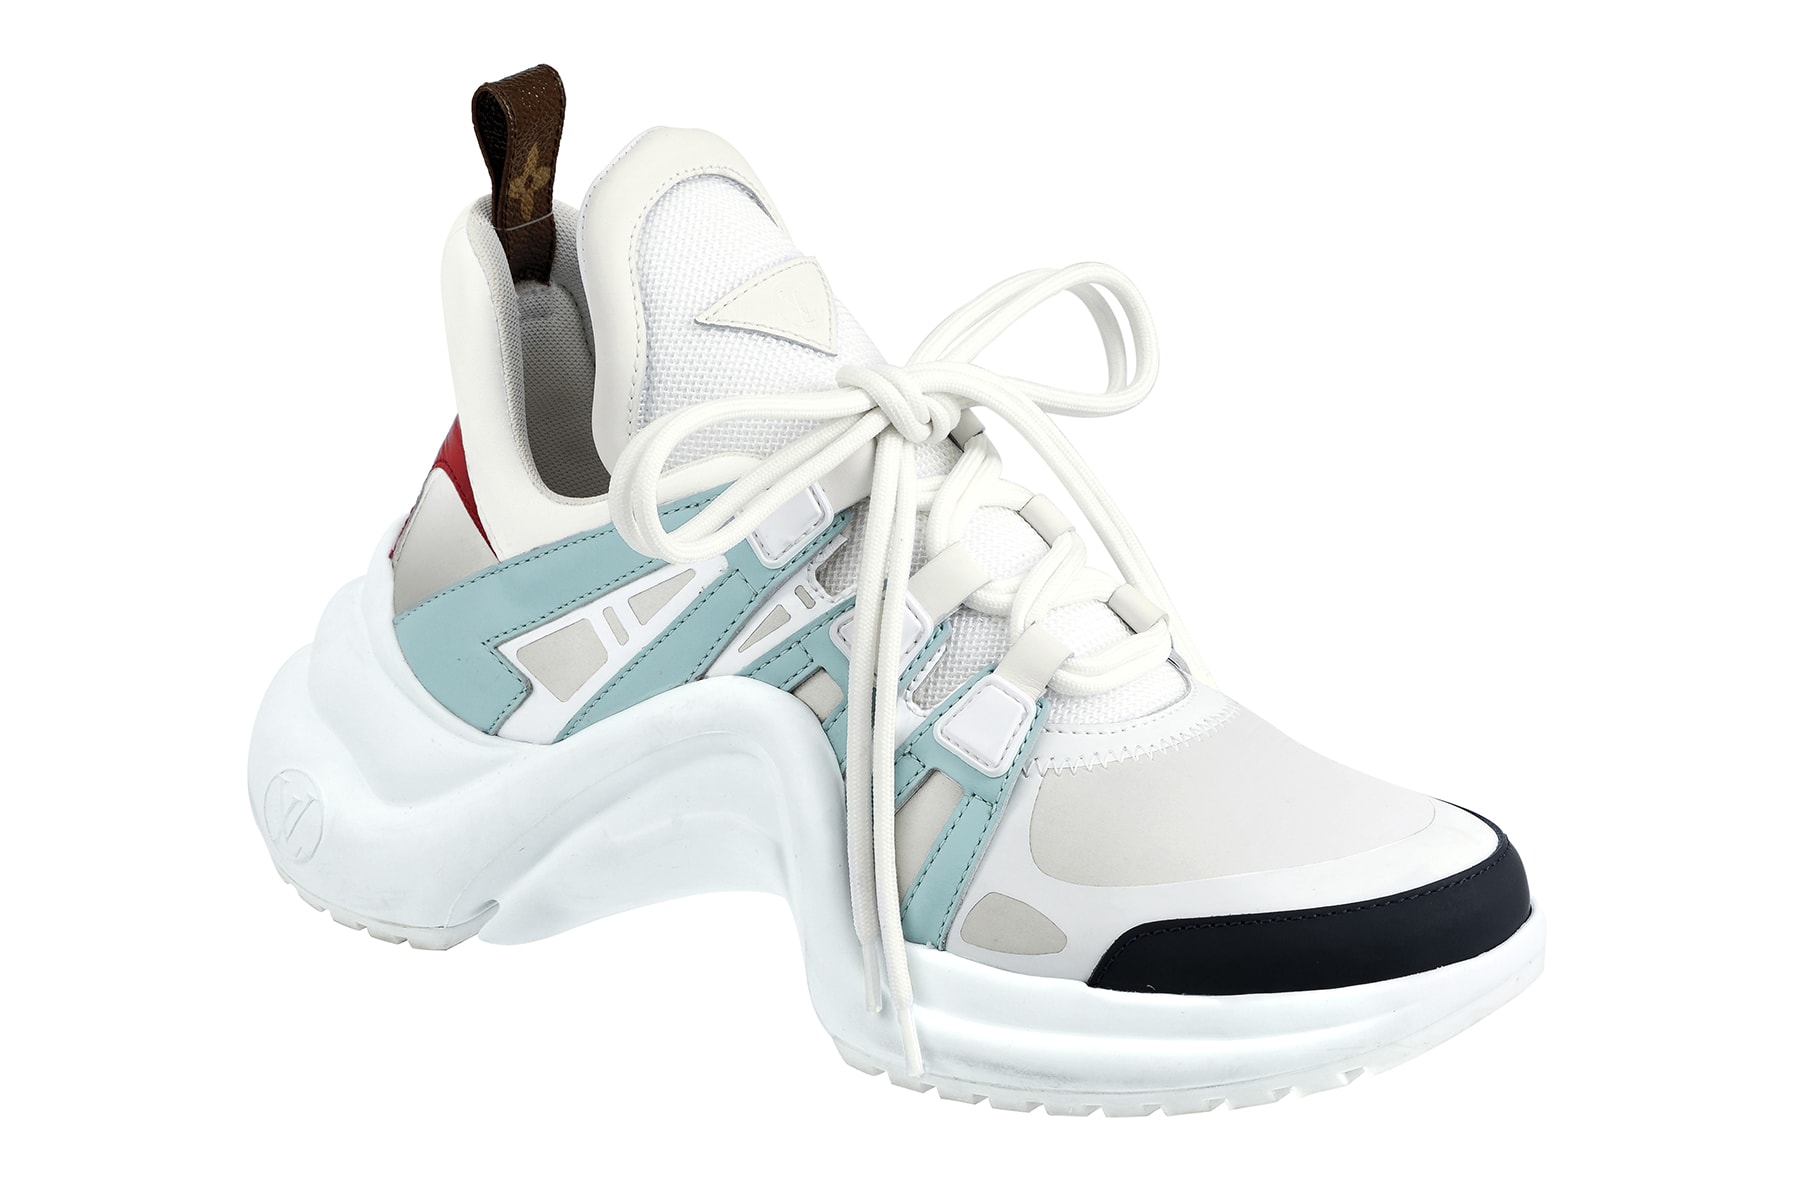 Shoe Of The Month: Louis Vuitton Archlight Sneakers